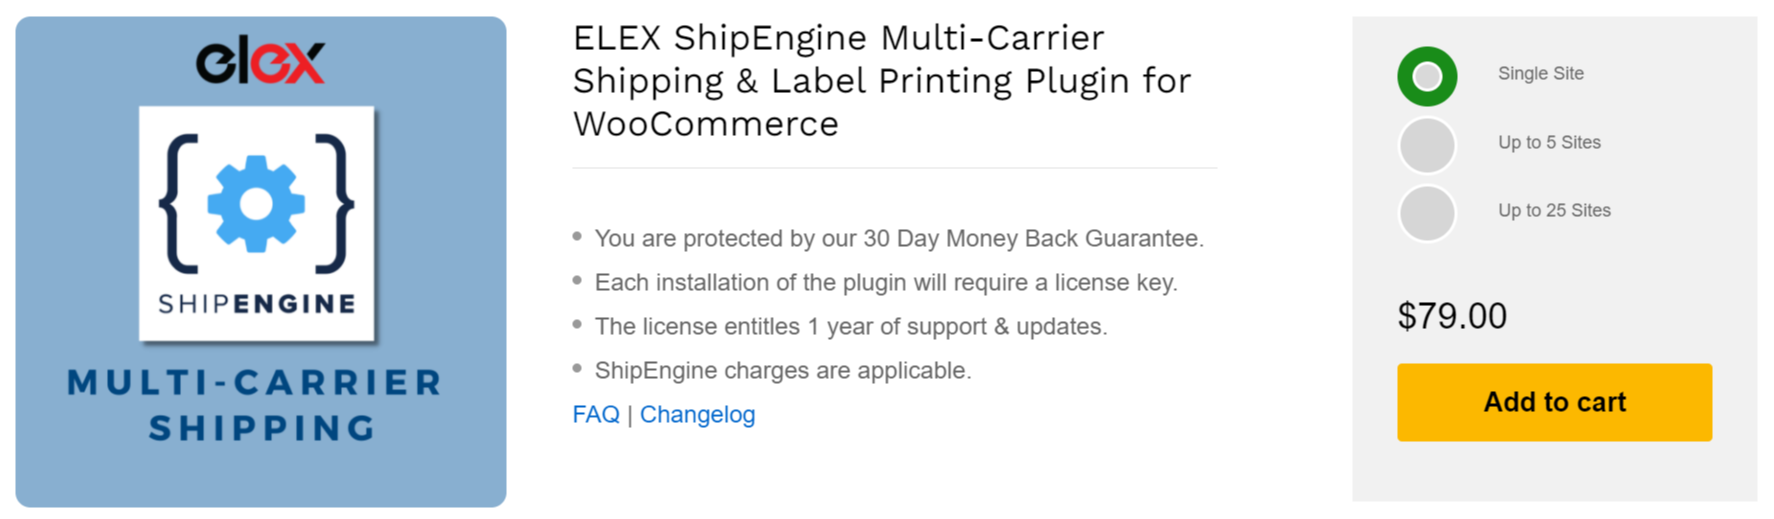 Best Multi-Carrier Shipping Plugin for eCommerce | ELEX ShipEngine Multi-Carrier Shipping & Label Printing Plugin for WooCommerce